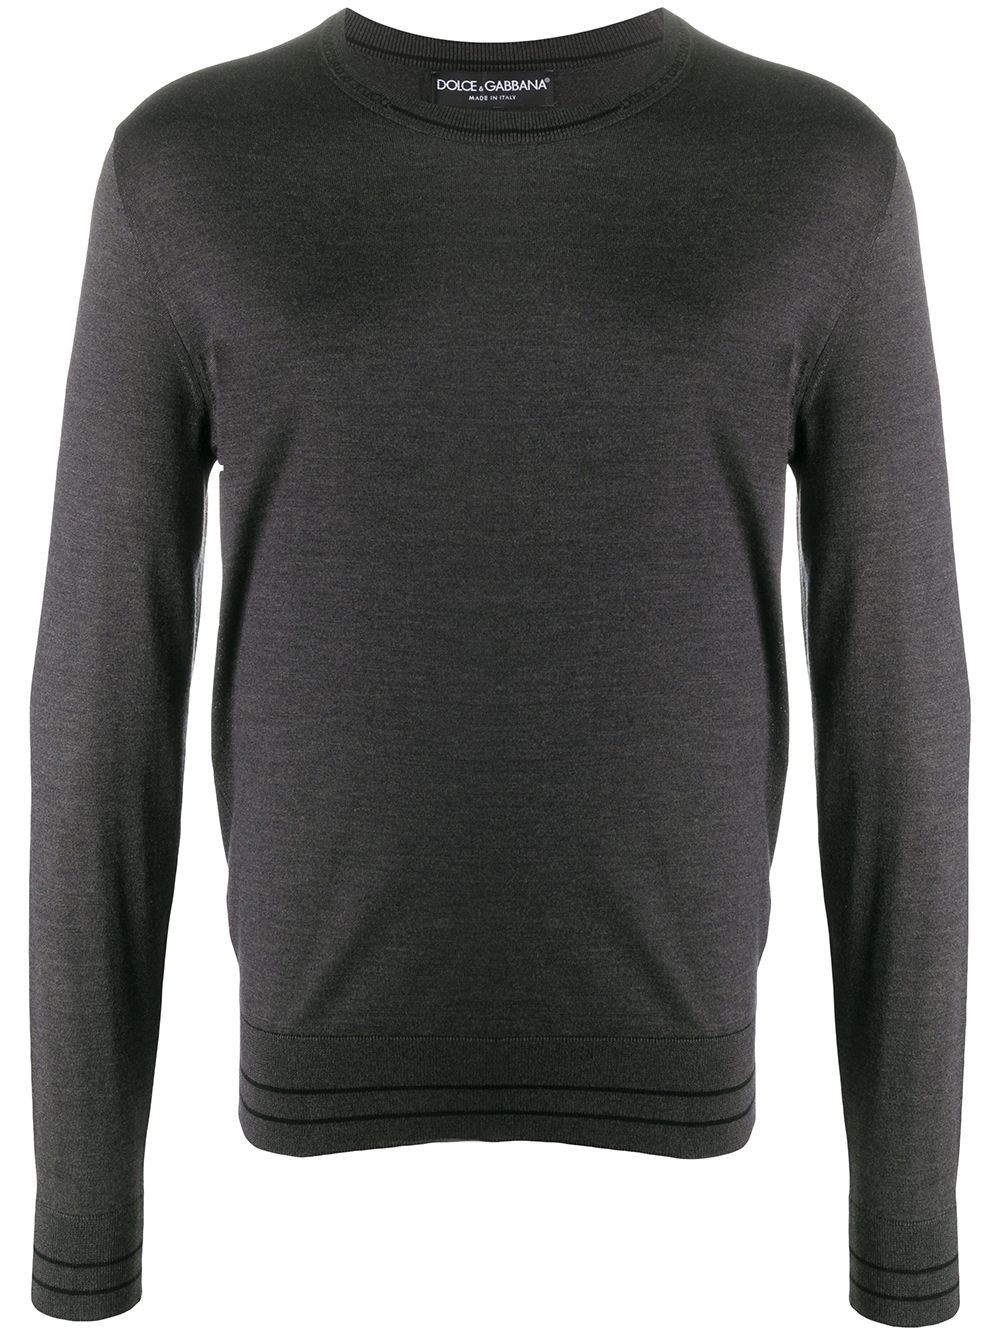 dolce & gabbana ROUND NECK PULLOVER available on montiboutique.com - 35758